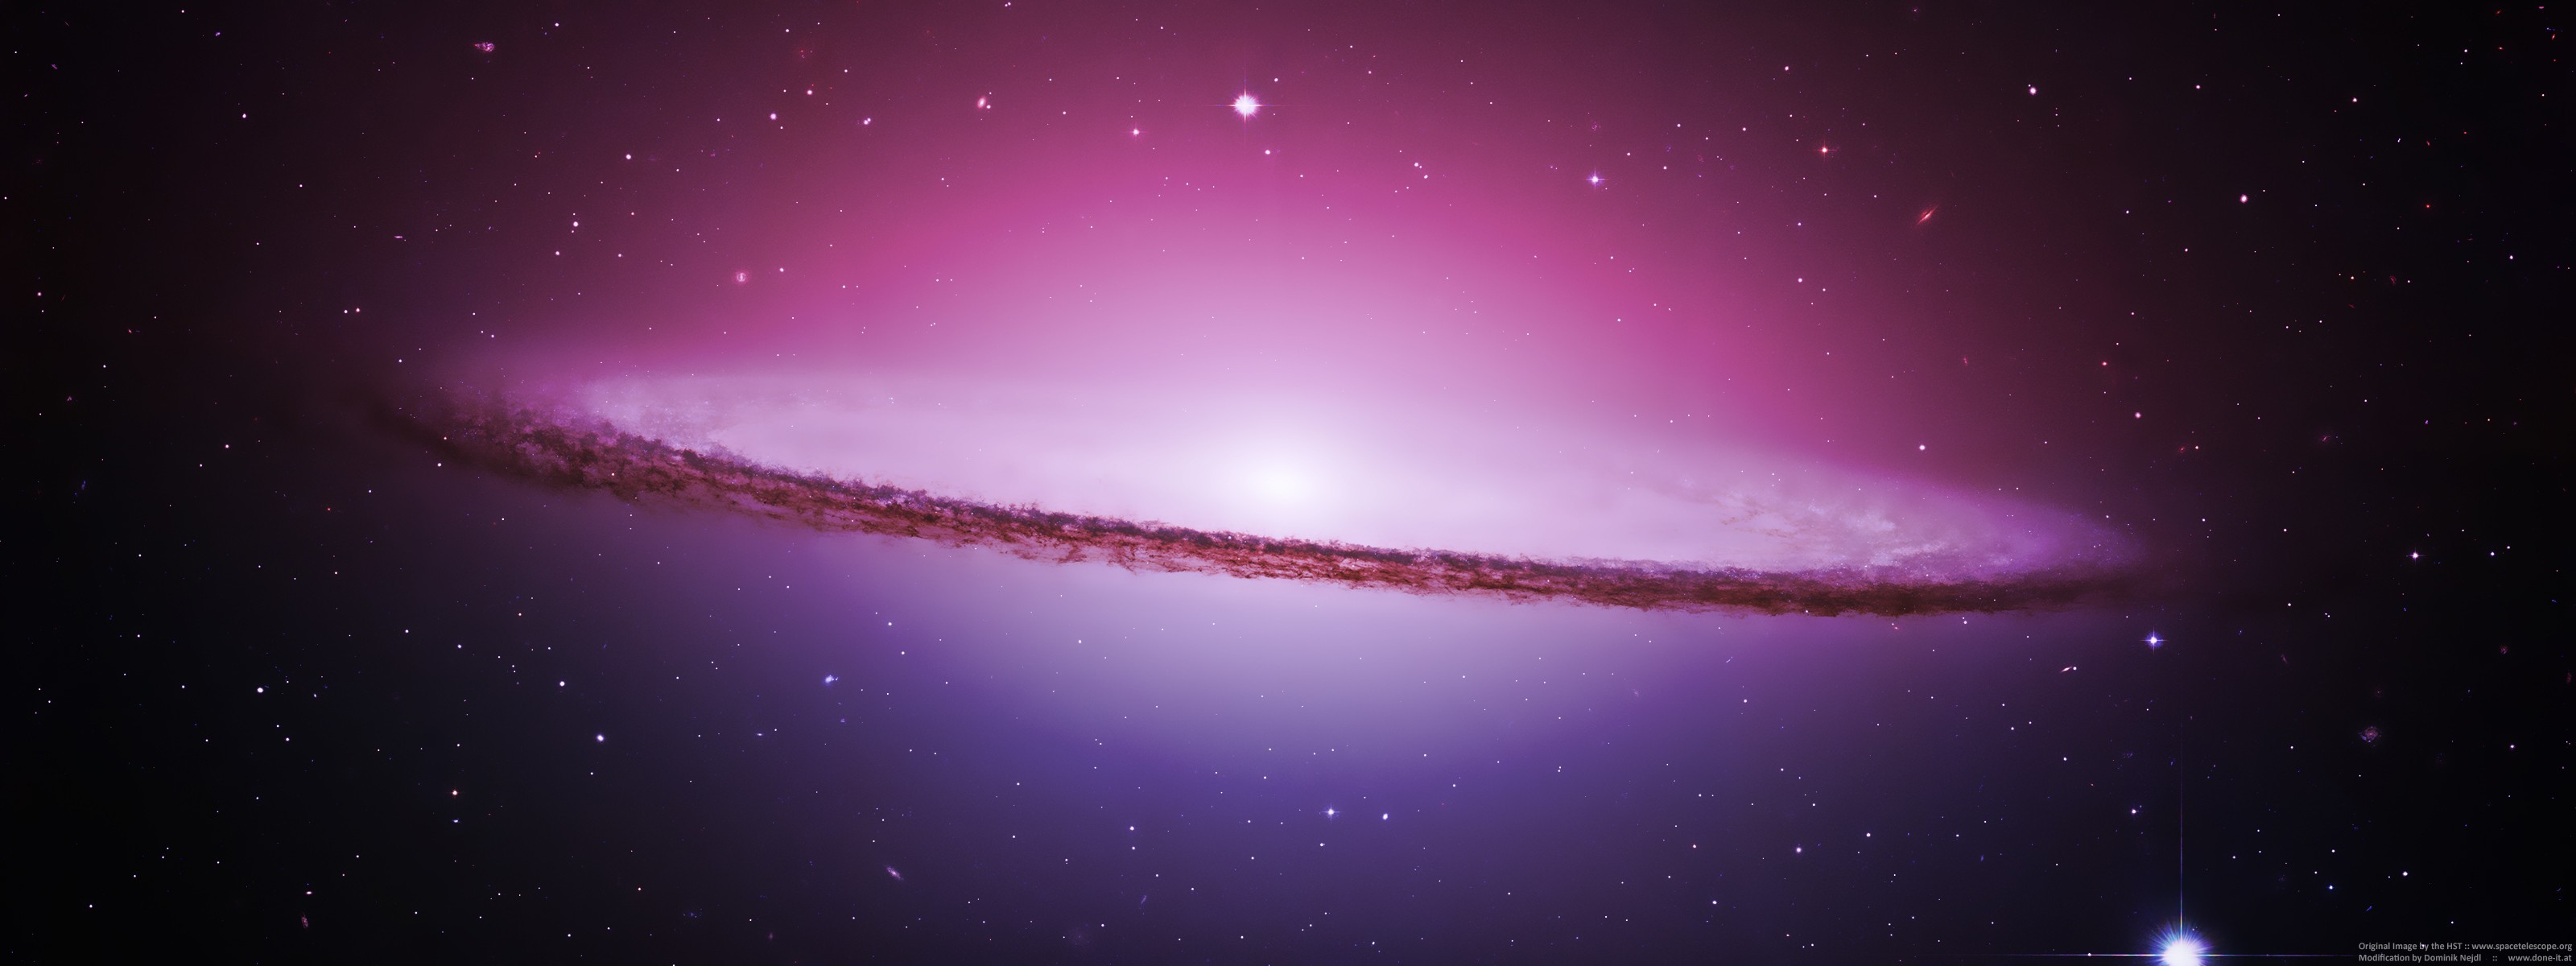 Wallpaper, digital art, galaxy, space art, nebula, atmosphere, astronomy, Sombrero Galaxy, outer space, astronomical object 3200x1200